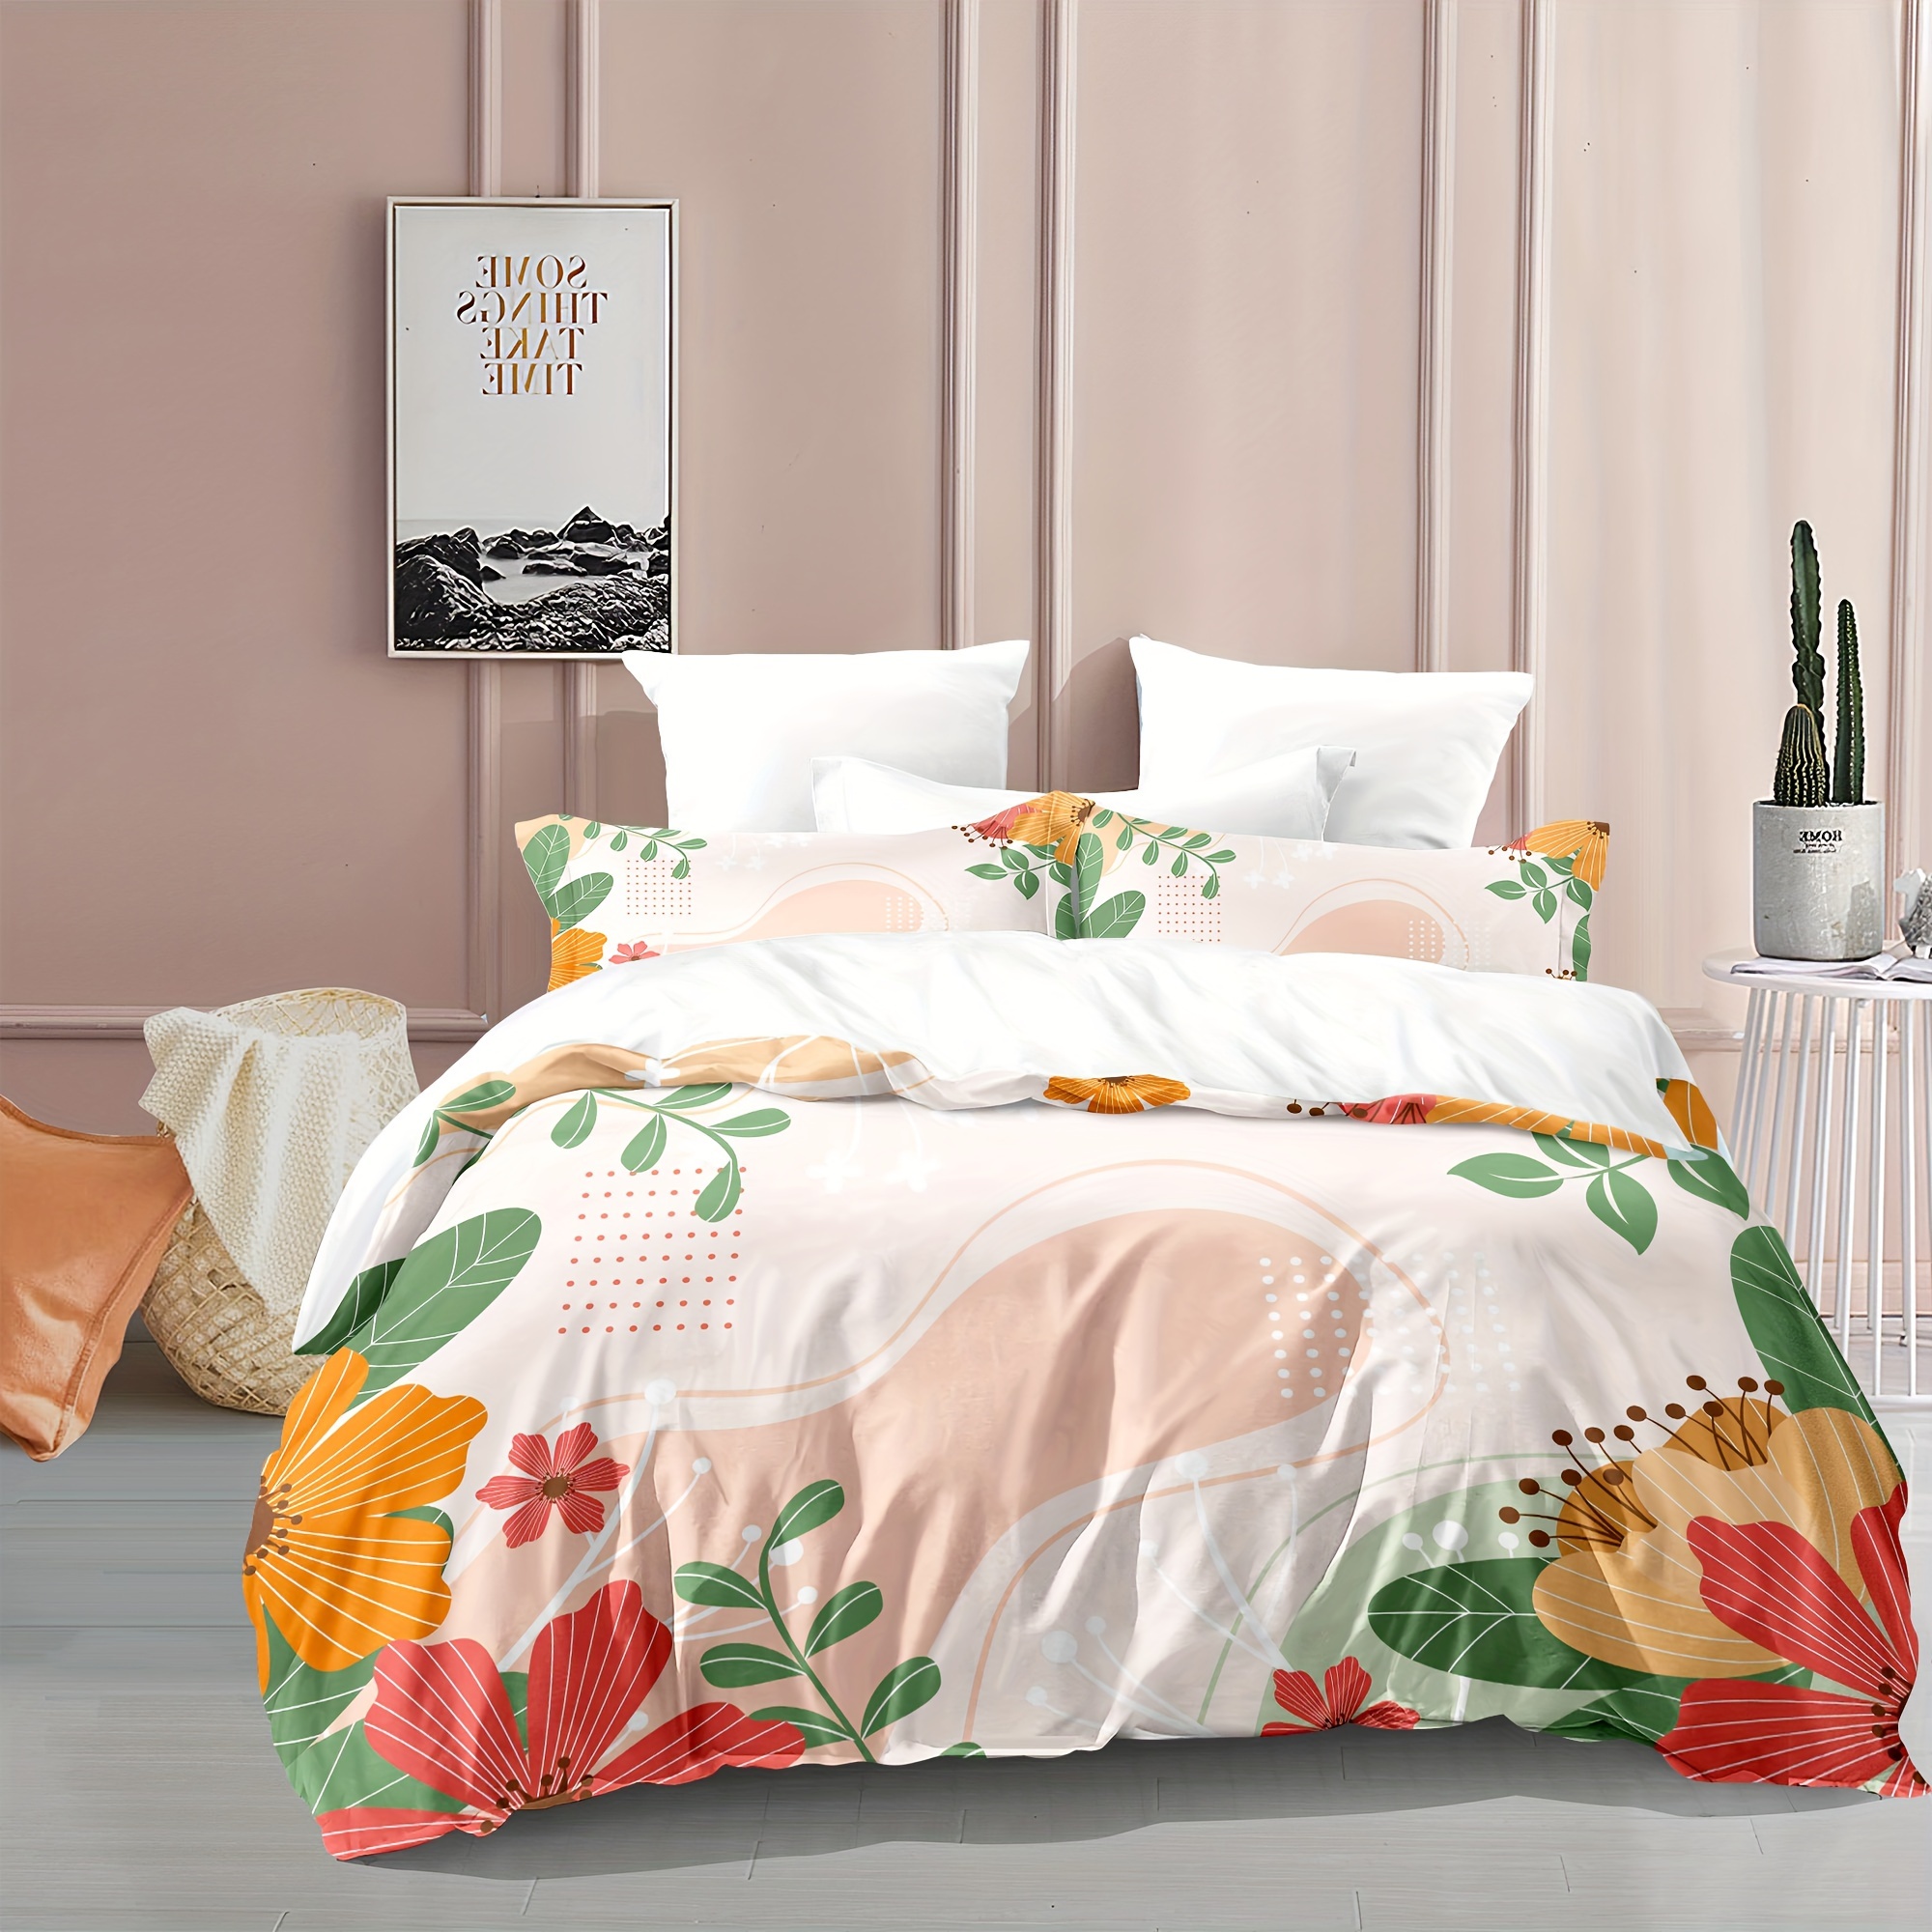 Janzaa Sage Green Comforter Twin ,2 Pcs Bedding Sets Floral Comforter Set  Plant Flowers Printed On Fluffy For All Season